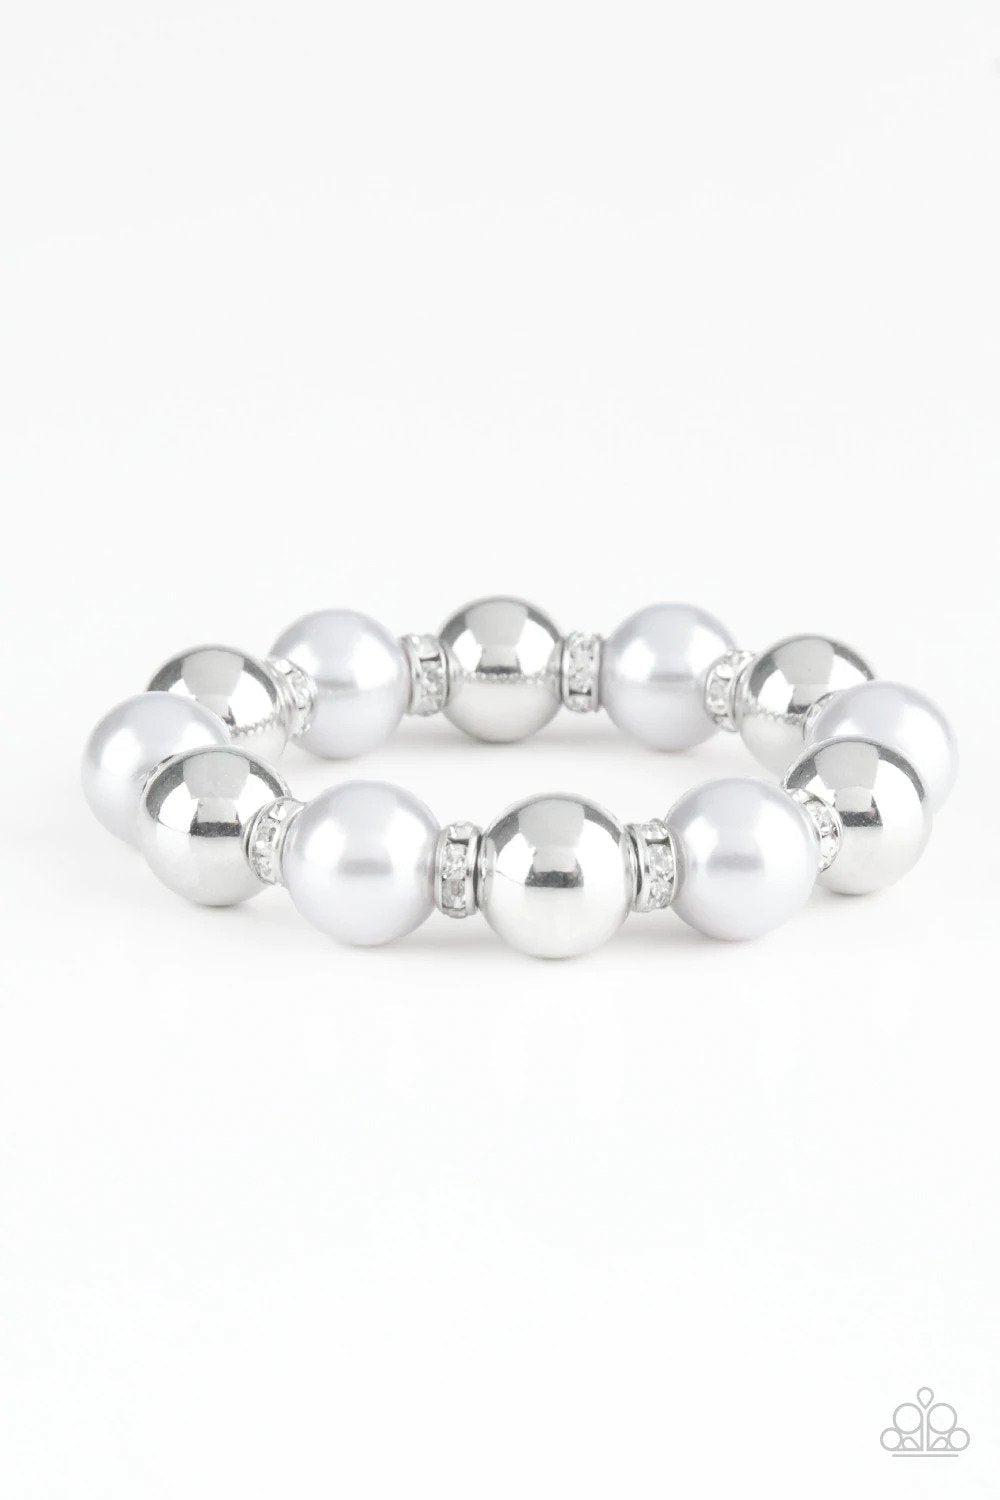 So Not Sorry Silver Bracelet - Paparazzi Accessories- lightbox - CarasShop.com - $5 Jewelry by Cara Jewels